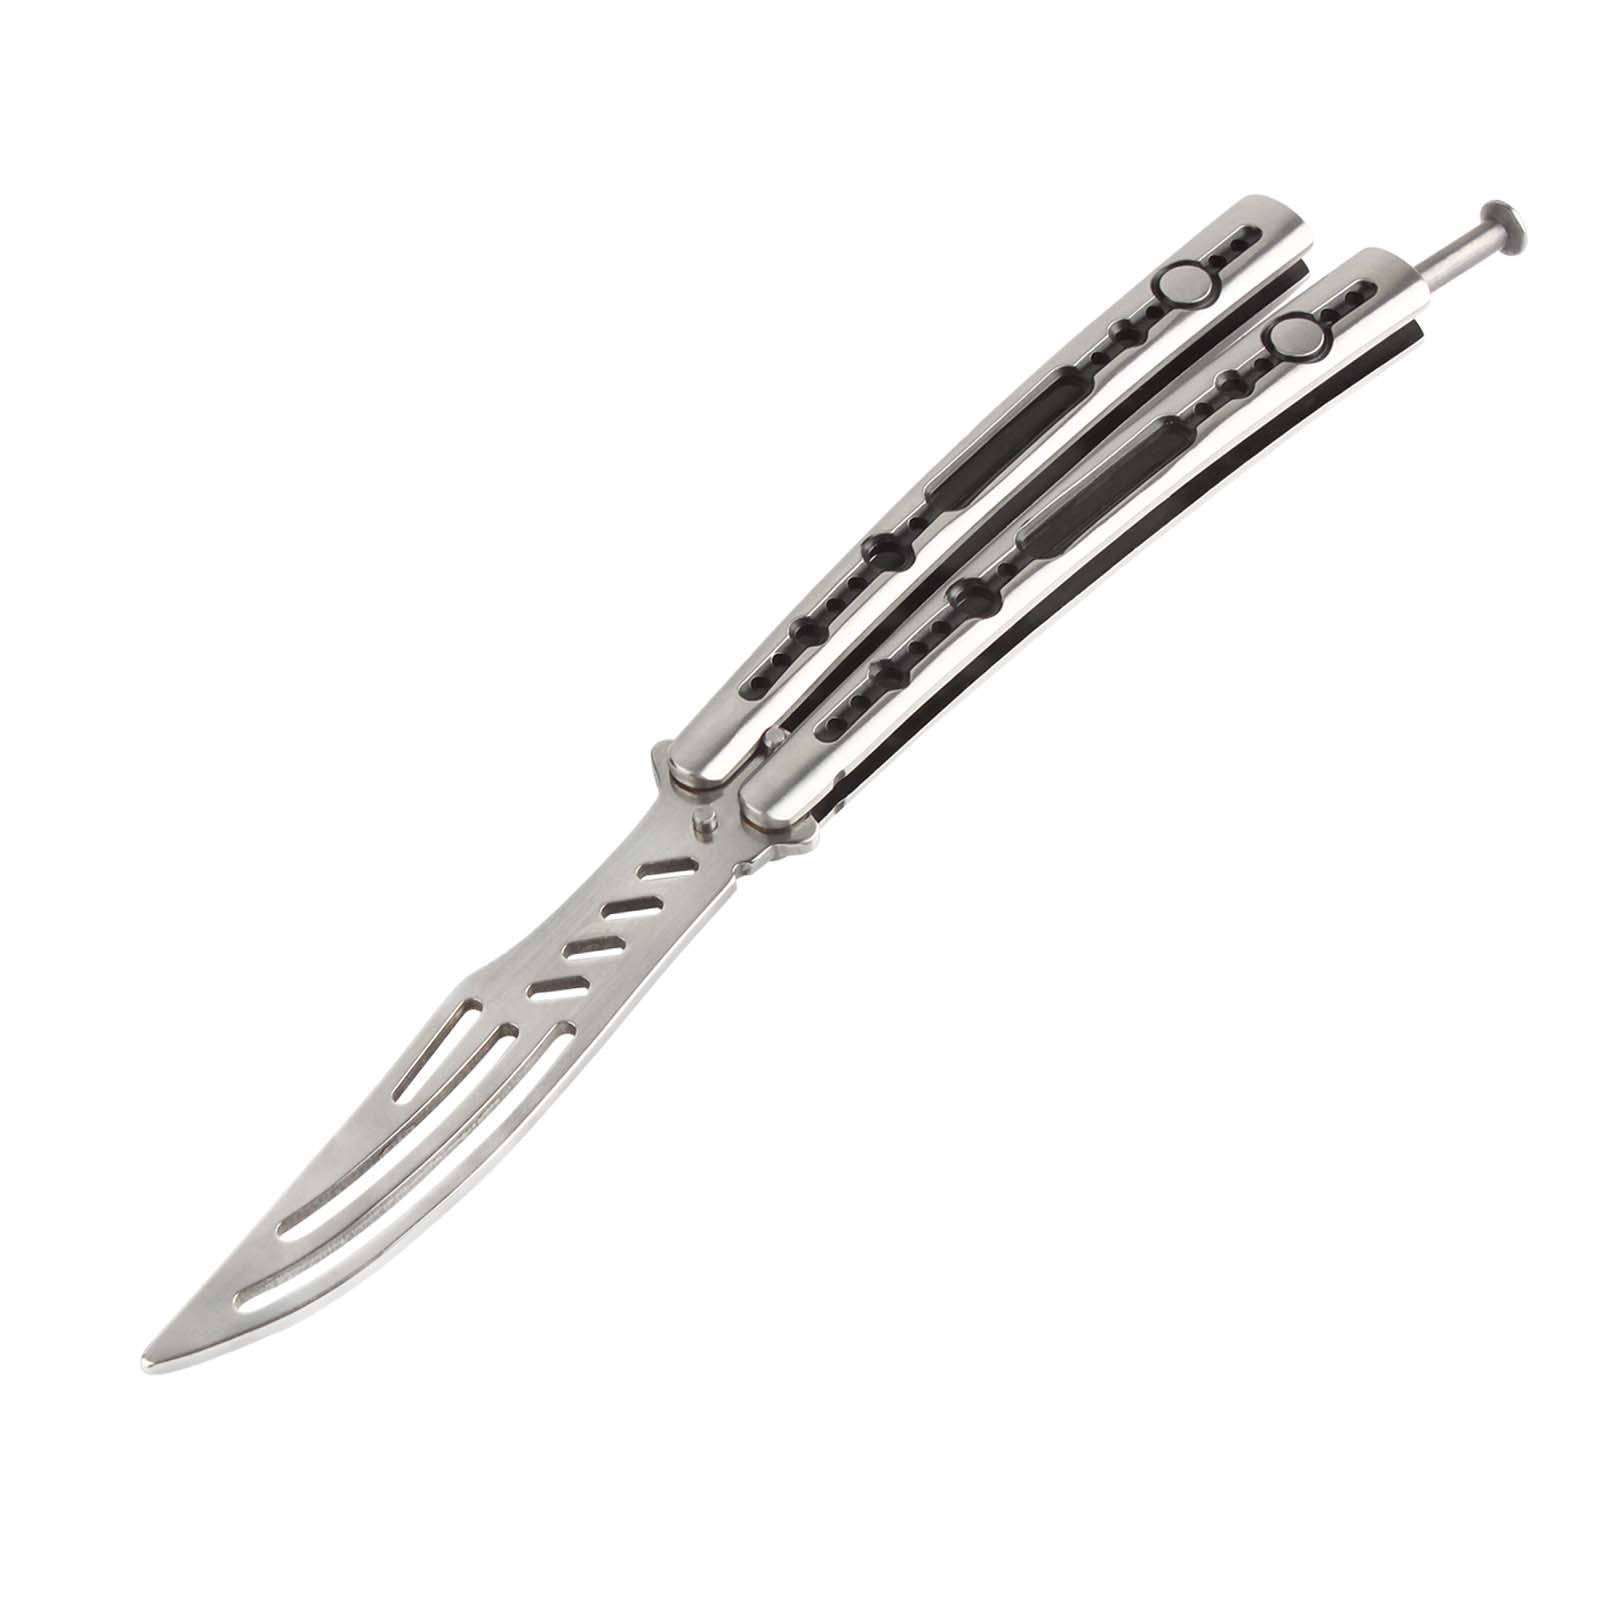 Andux Balisong Foldable Practice Flipper Tool CSGO(Only Available in European Countries)